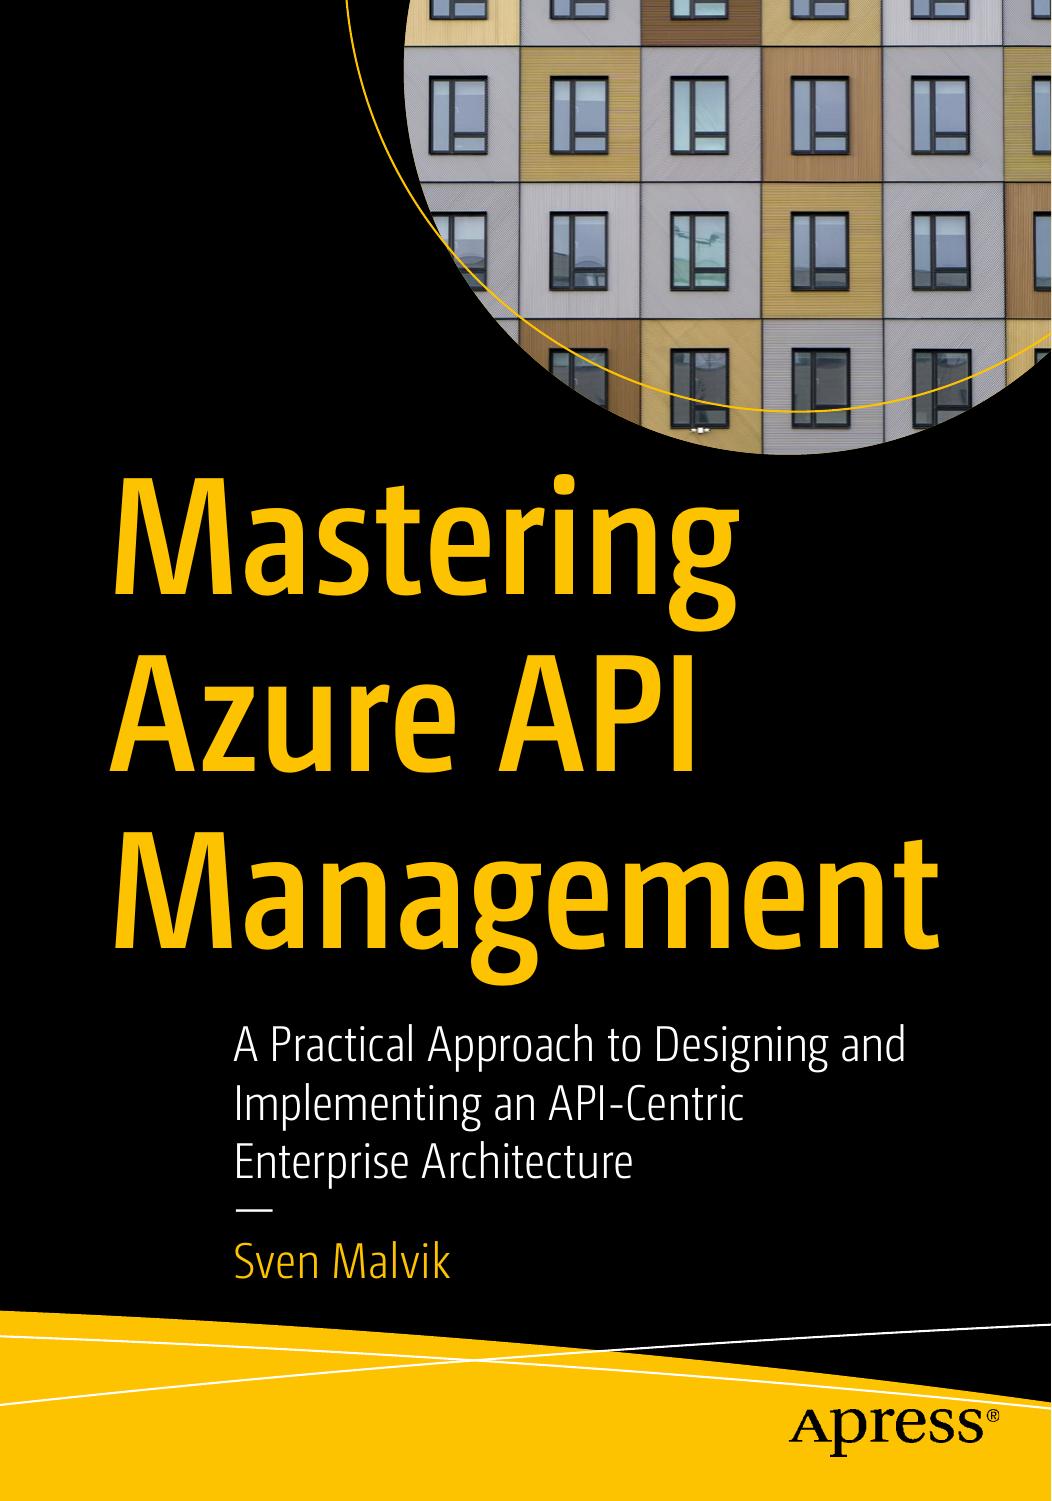 Mastering Azure API Management: A Practical Approach to Designing and Implementing an API-Centric Enterprise Architecture